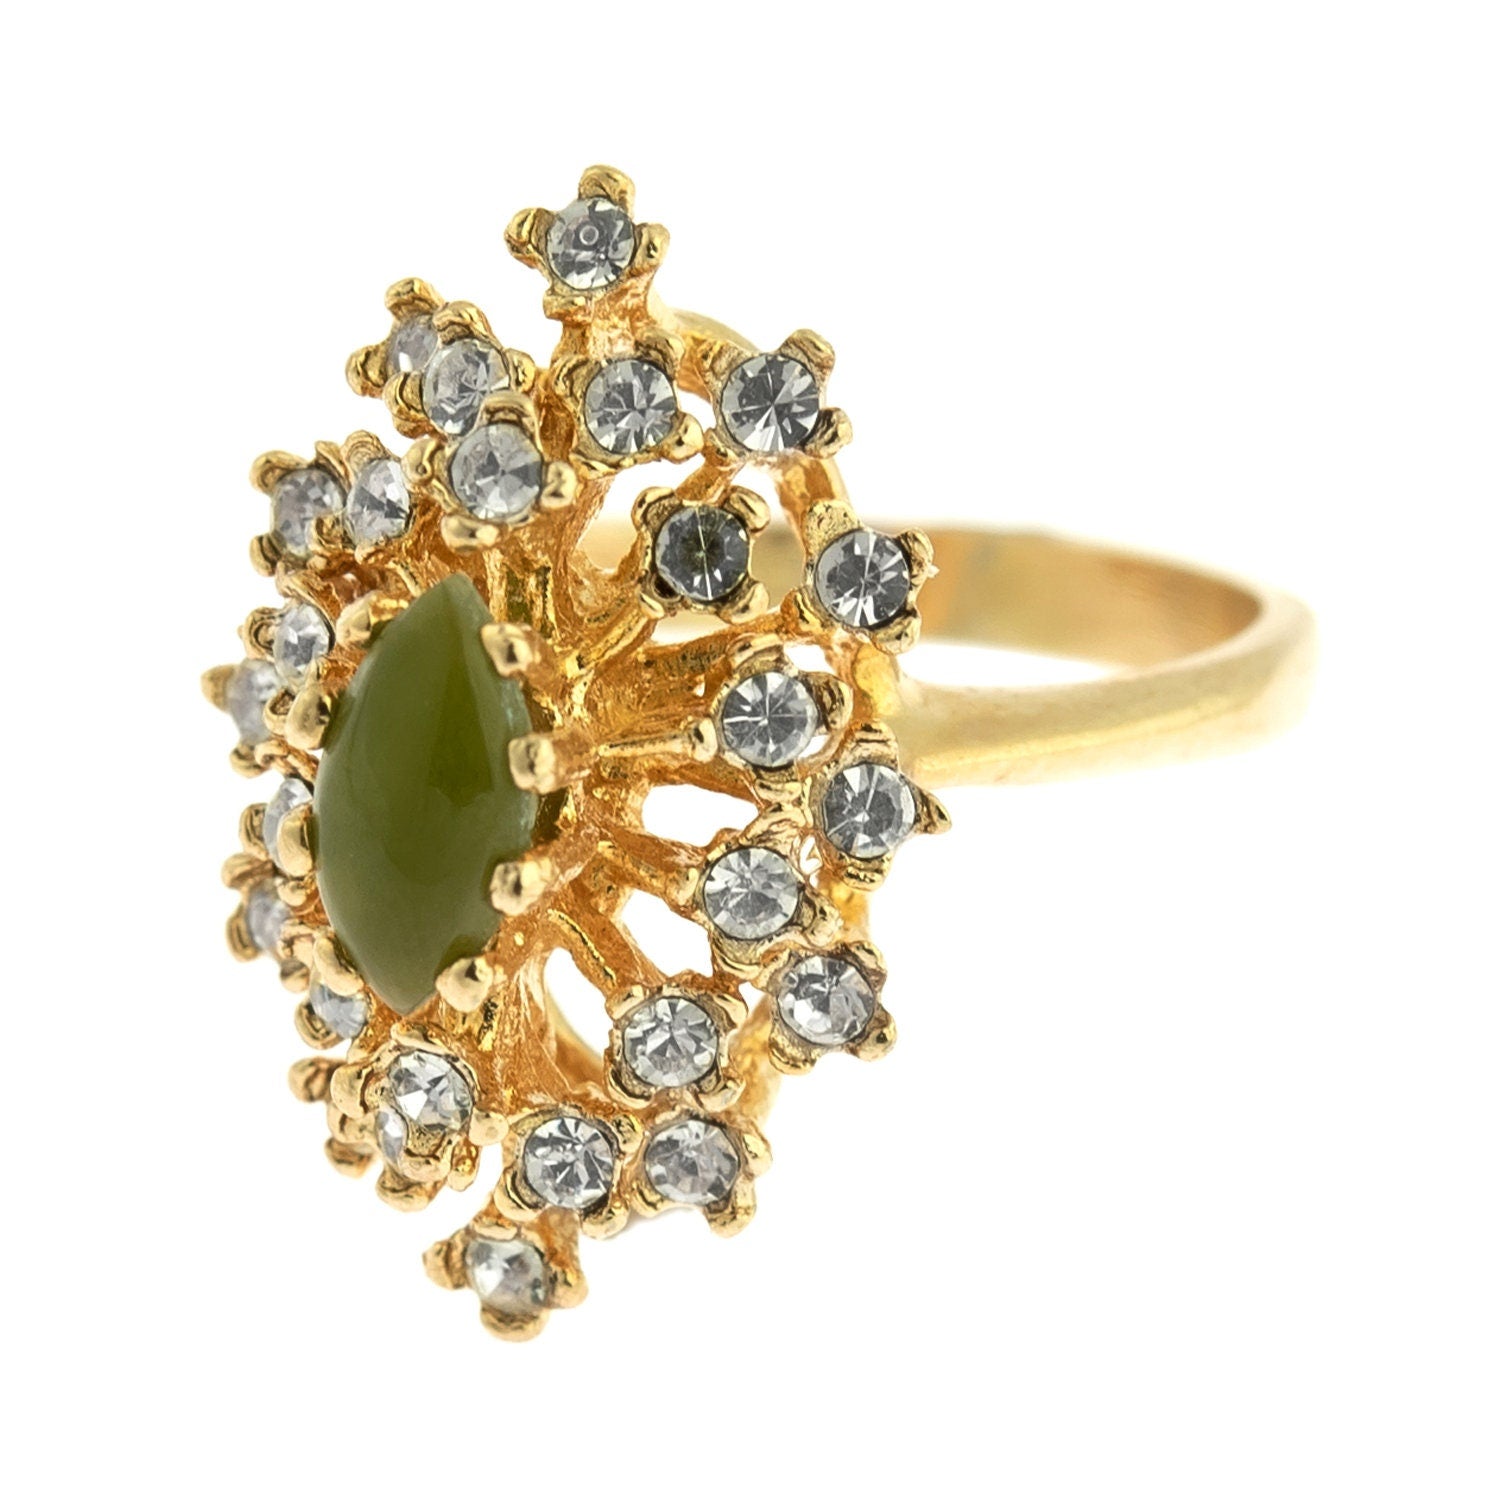 Vintage Ring Genuine Jade Surrounded by Clear Swarovski Crystals Cocktail Ring 18k Gold R221 Antique Womans - Limited Stock - Never Worn